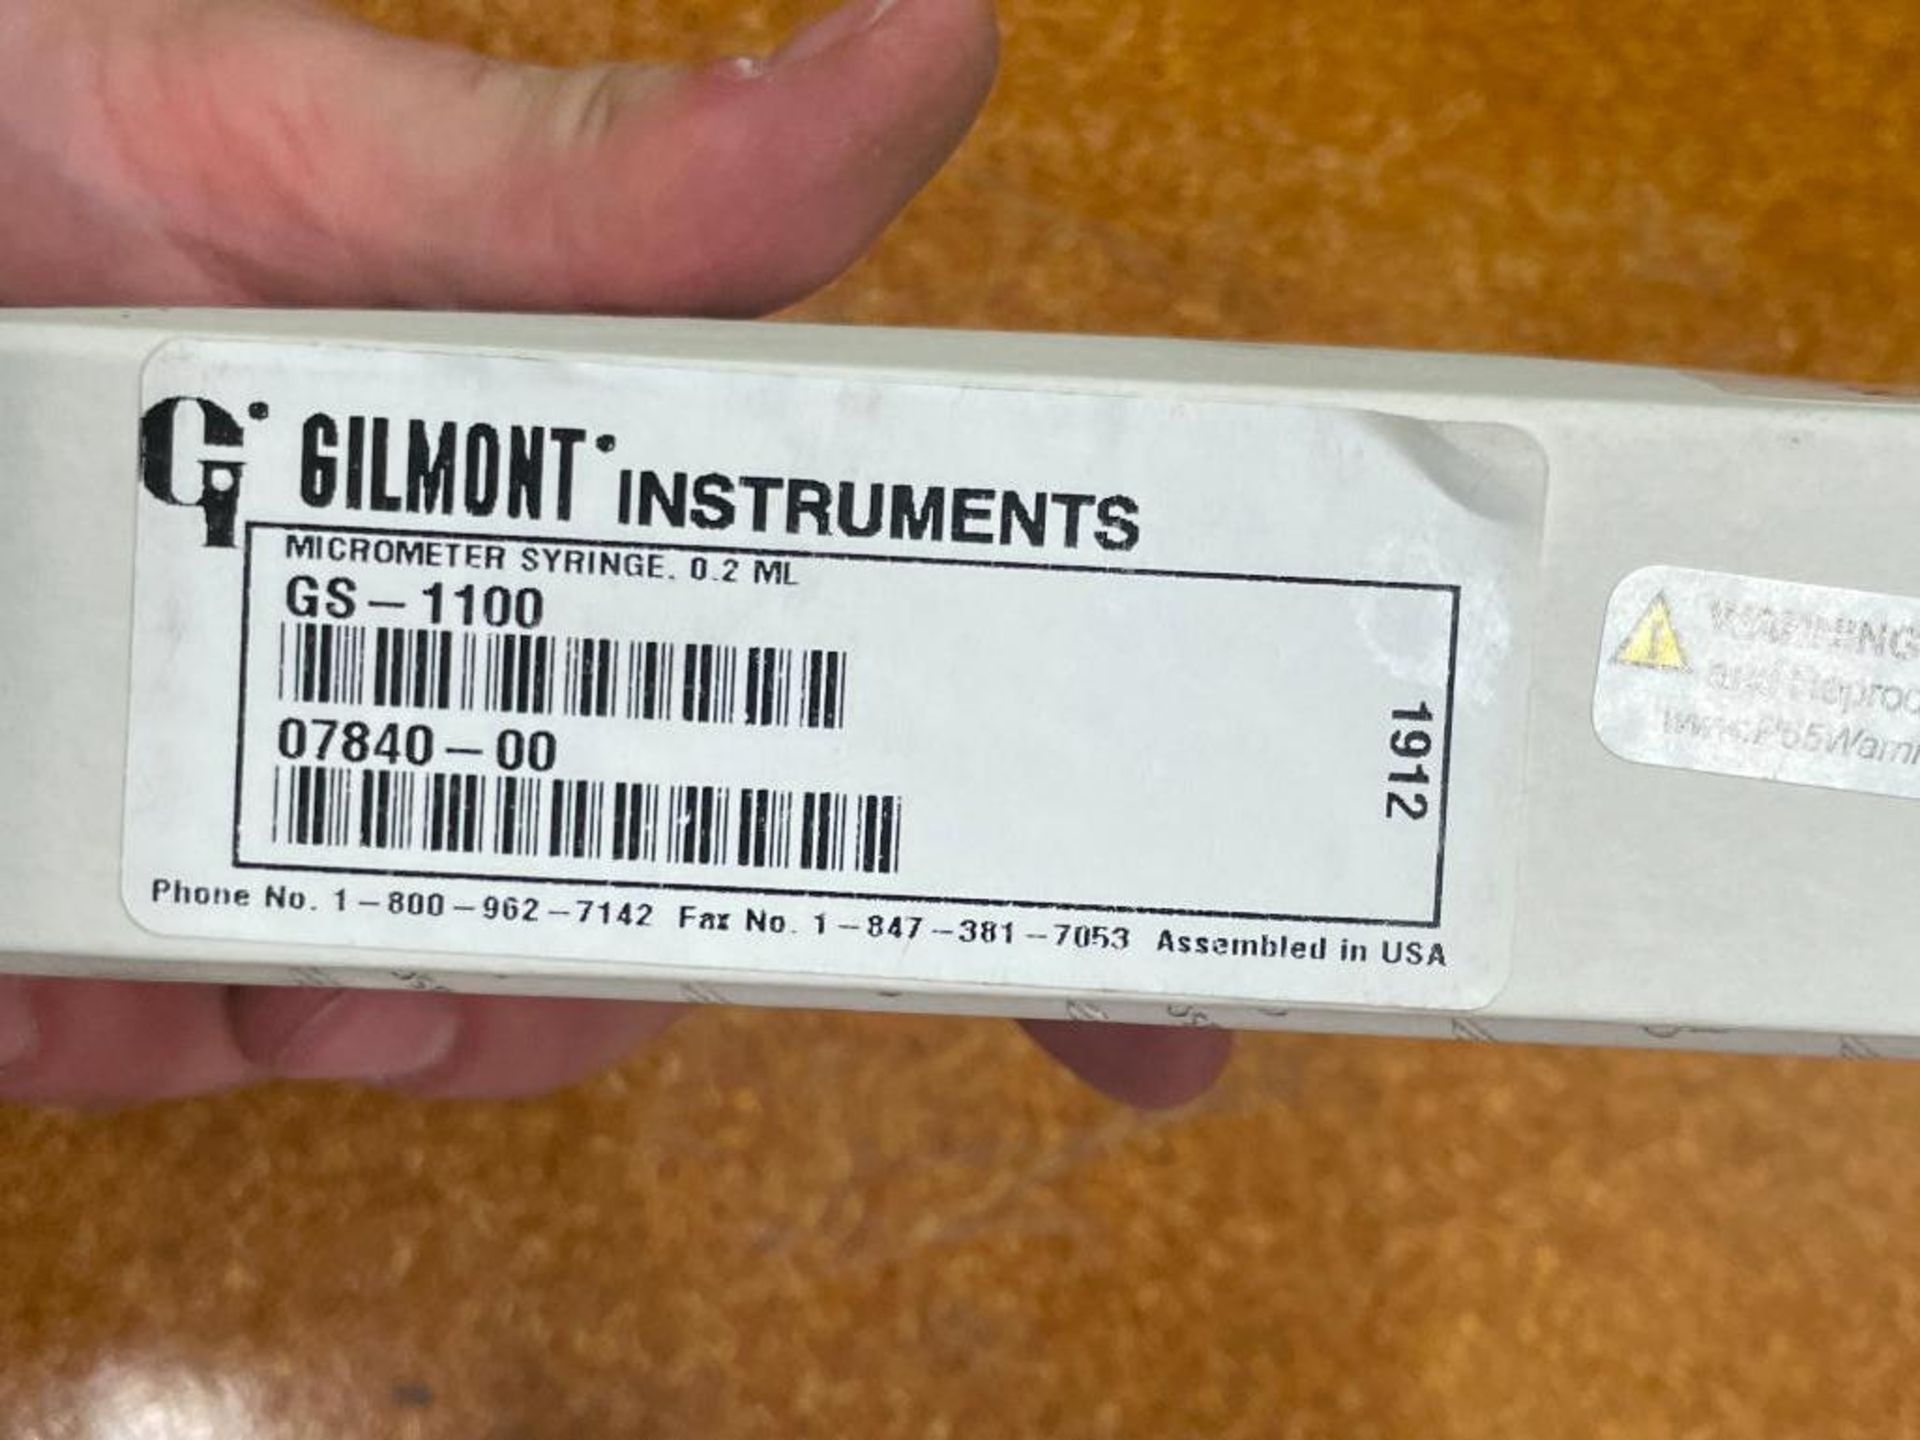 (2) 2.0 ML MICROMETER SYRINGES BRAND/MODEL: GILMONT GS-1200 QTY: 2 - Image 3 of 3